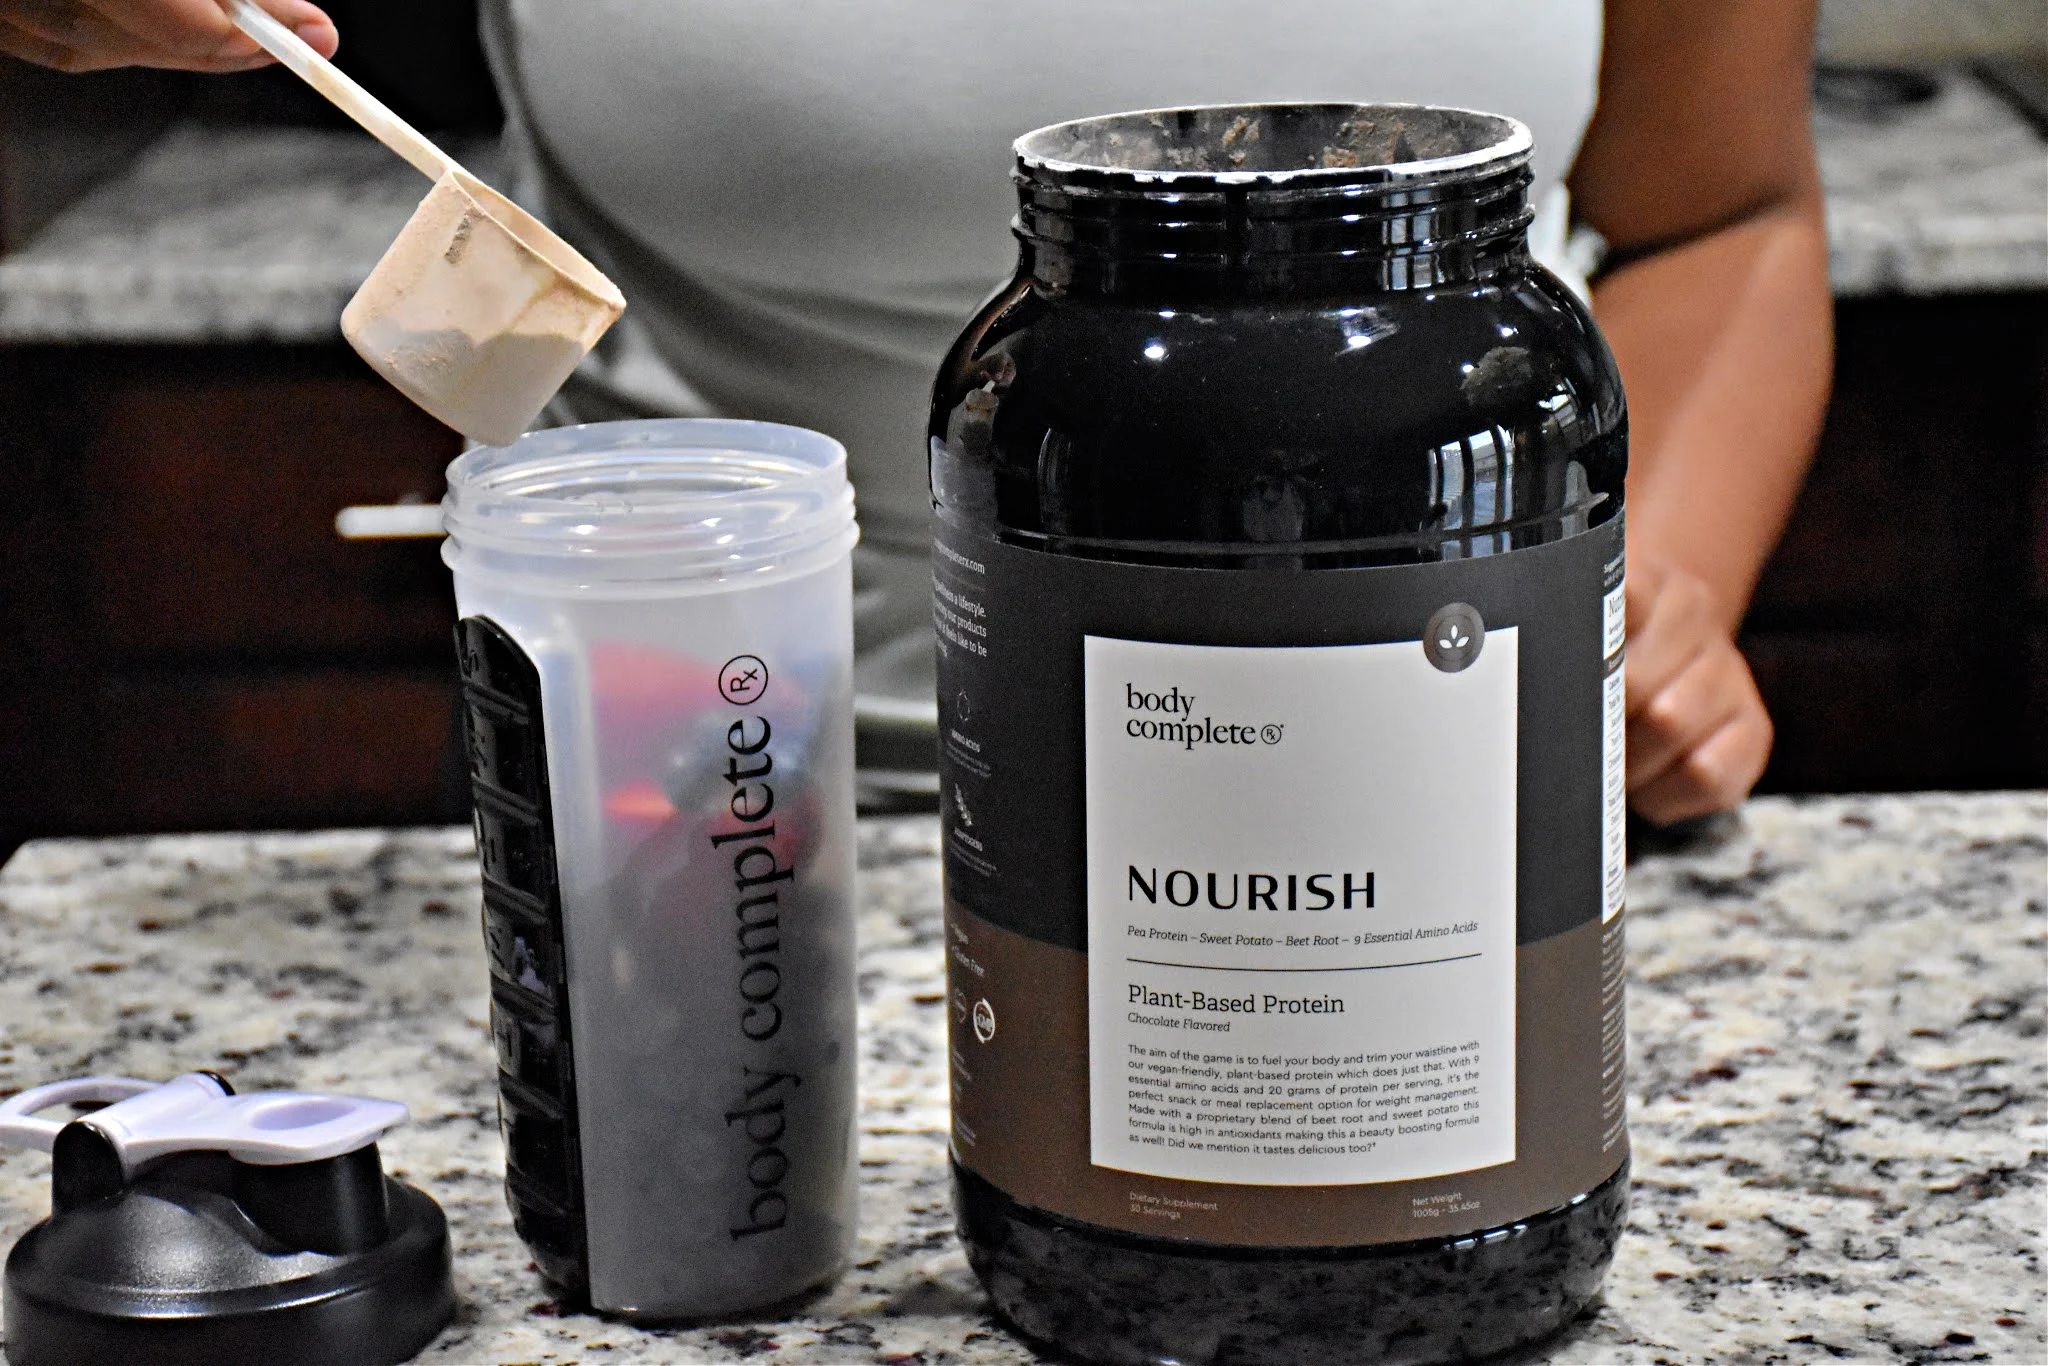 Trim Your Waistline Naturally by using Body Complete RX Nourish Plant-Based Protein